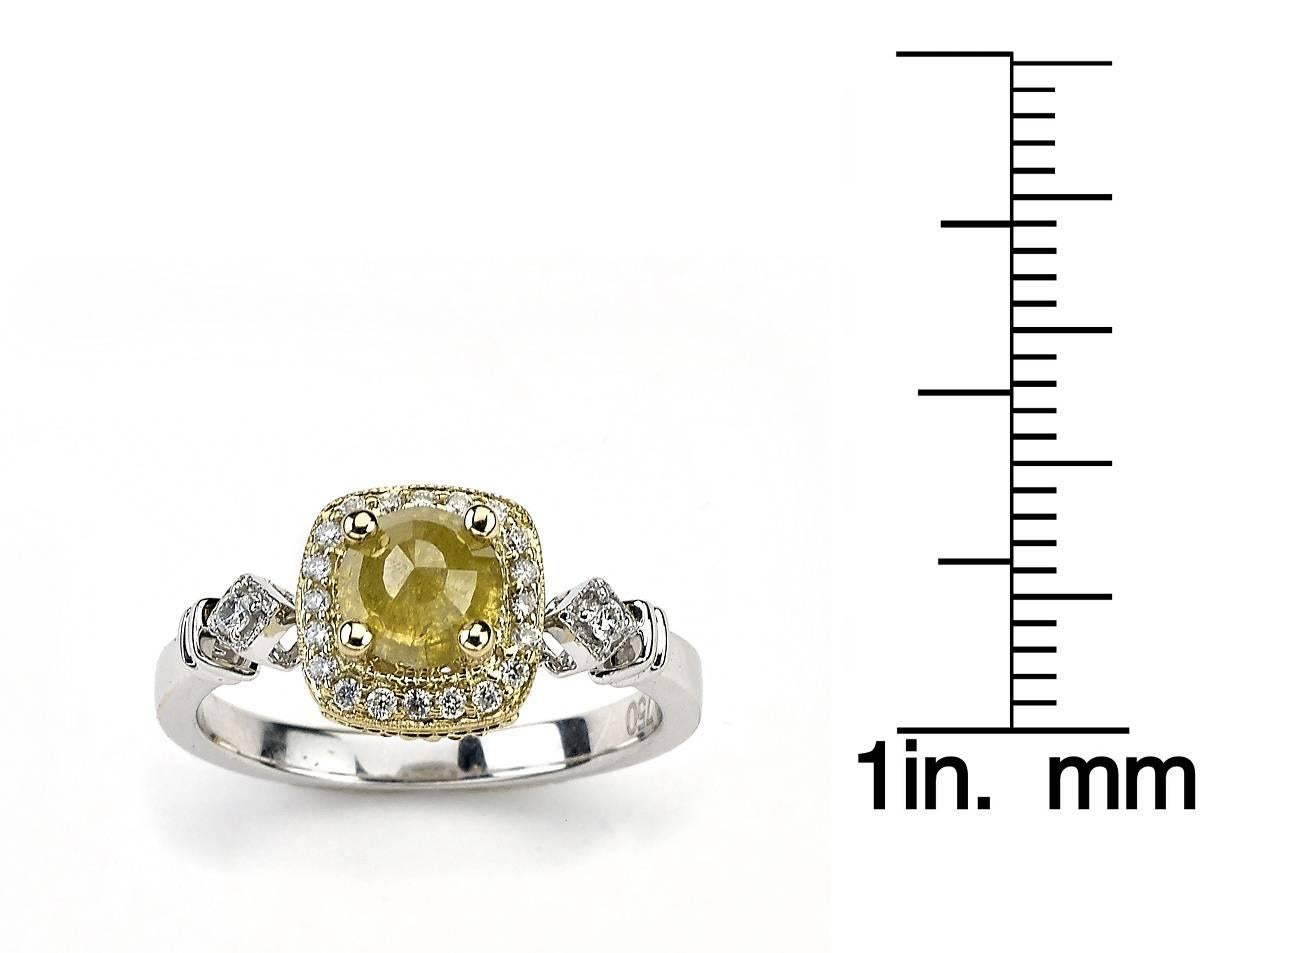 Contemporary Two-Tone Ring with Fancy Yellow Diamond Centre